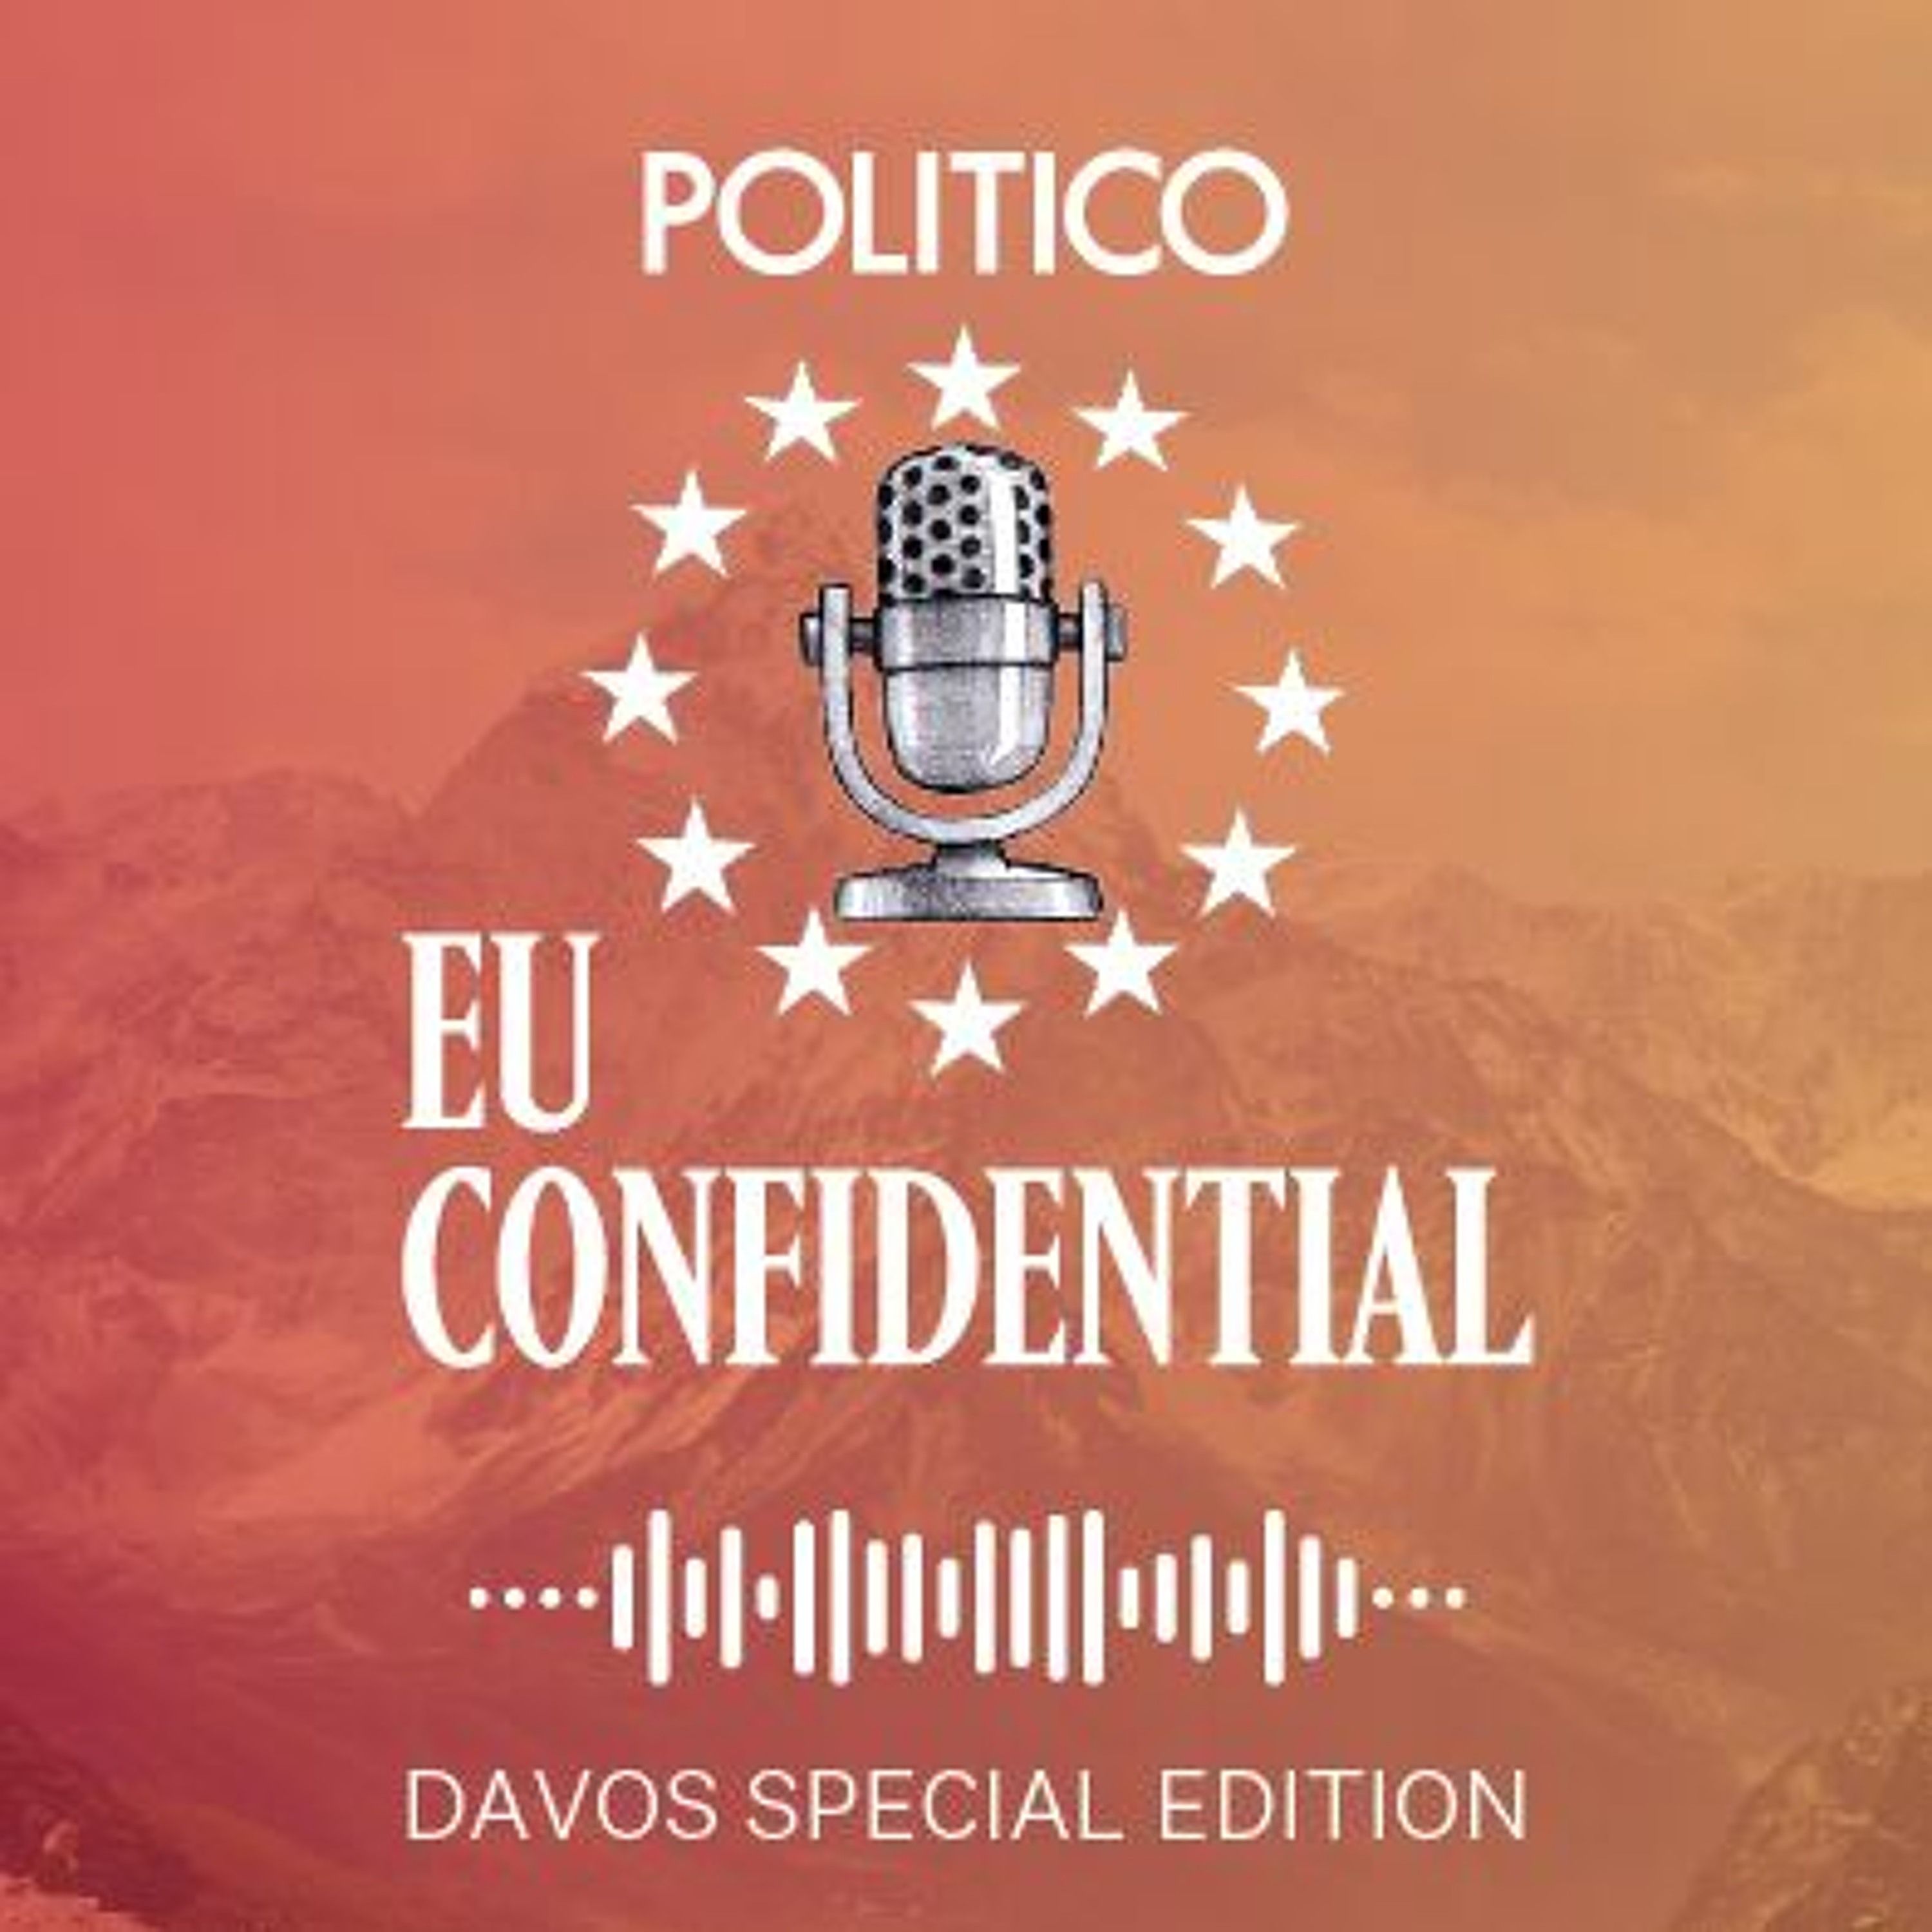 Davos Confidential #1, presented by Goldman Sachs: World Economic Forum preview